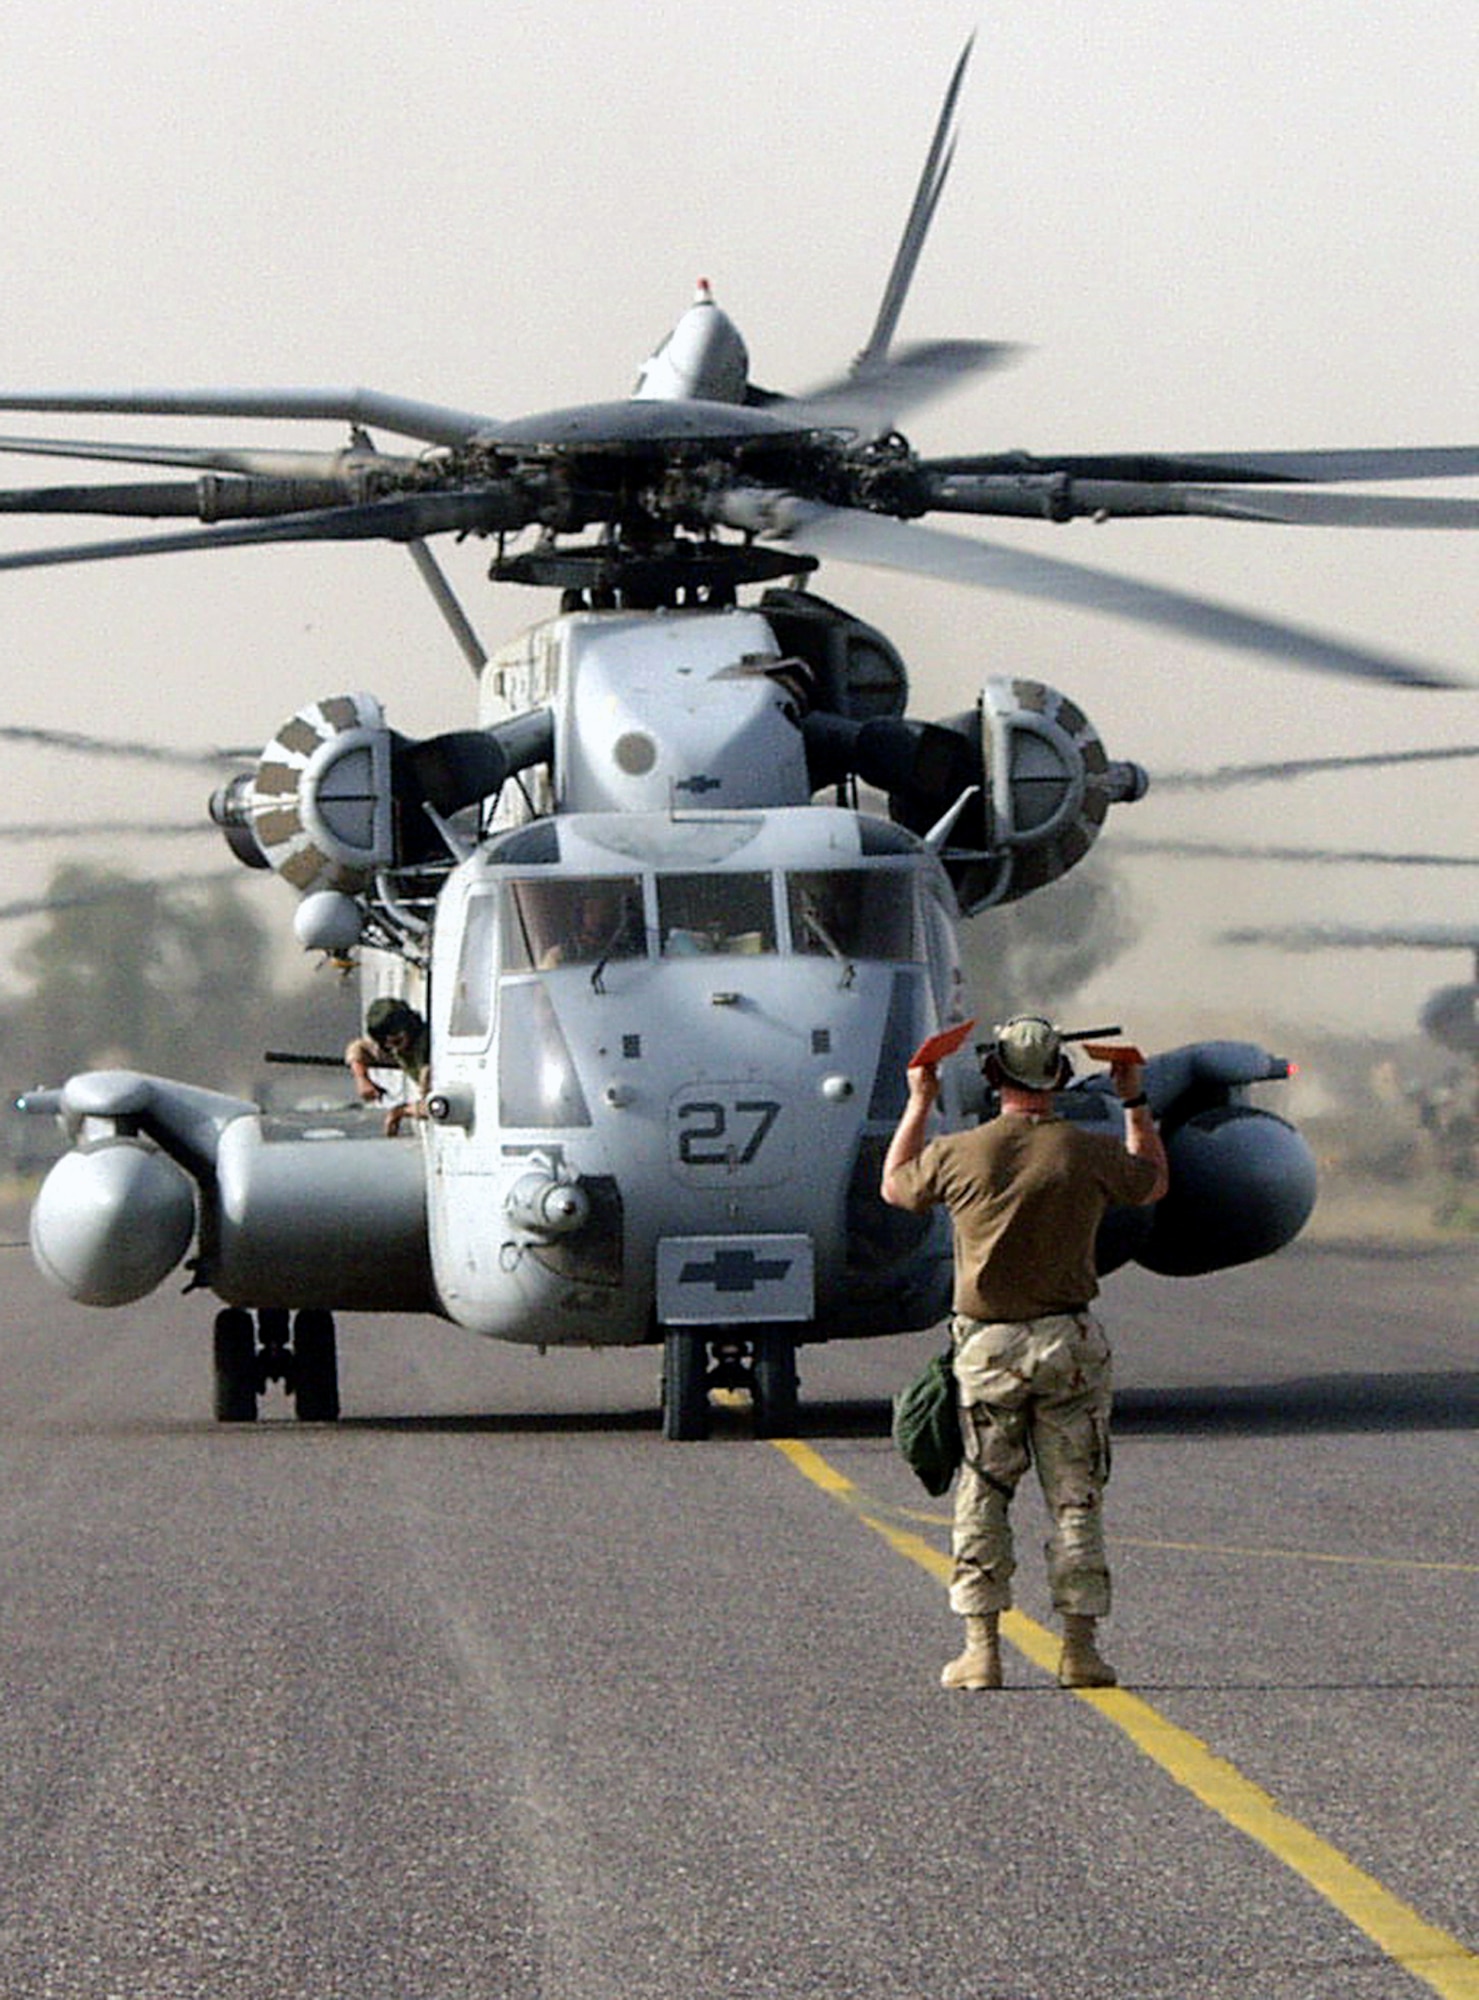 OPERATION IRAQI FREEDOM – Staff Sgt. Jassen Jack, directs a Marine CH-53 helicopter carrying Marines to a parking spot by a C-130. The 386th Transient Alert team played a key role in taking care of the aircraft transporting nearly 850 Marines moving forward to support operations in Iraq. Operation Iraqi Freedom is the multinational coalition effort to liberate the Iraqi people, eliminate Iraq’s weapons of mass destruction and end the regime of Saddam Hussein. (U.S. Air Force photo by Staff Sgt. Karen J. Tomasik)